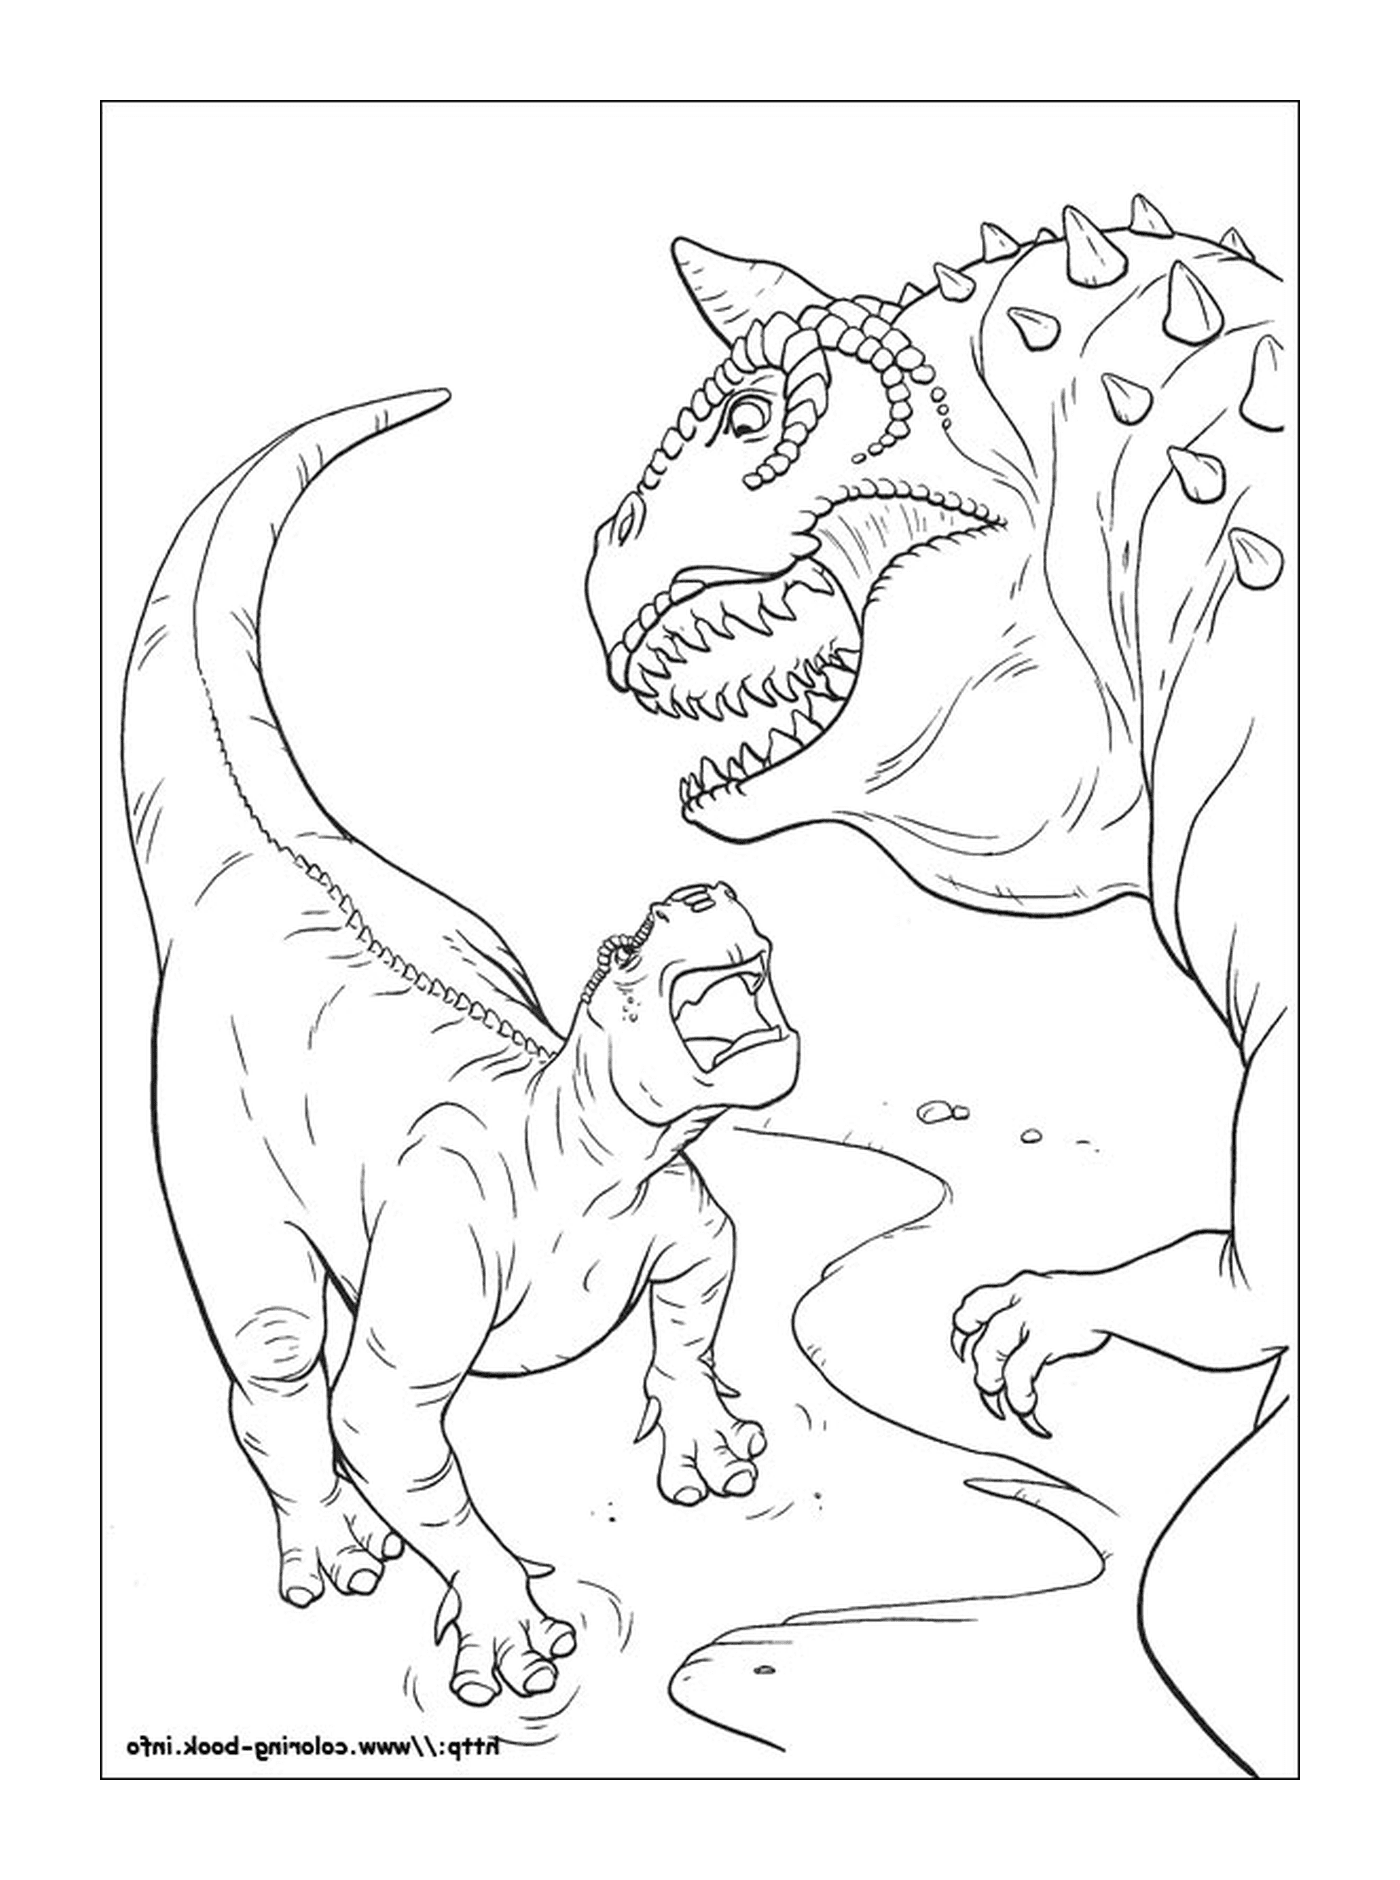  Two dinosaurs 